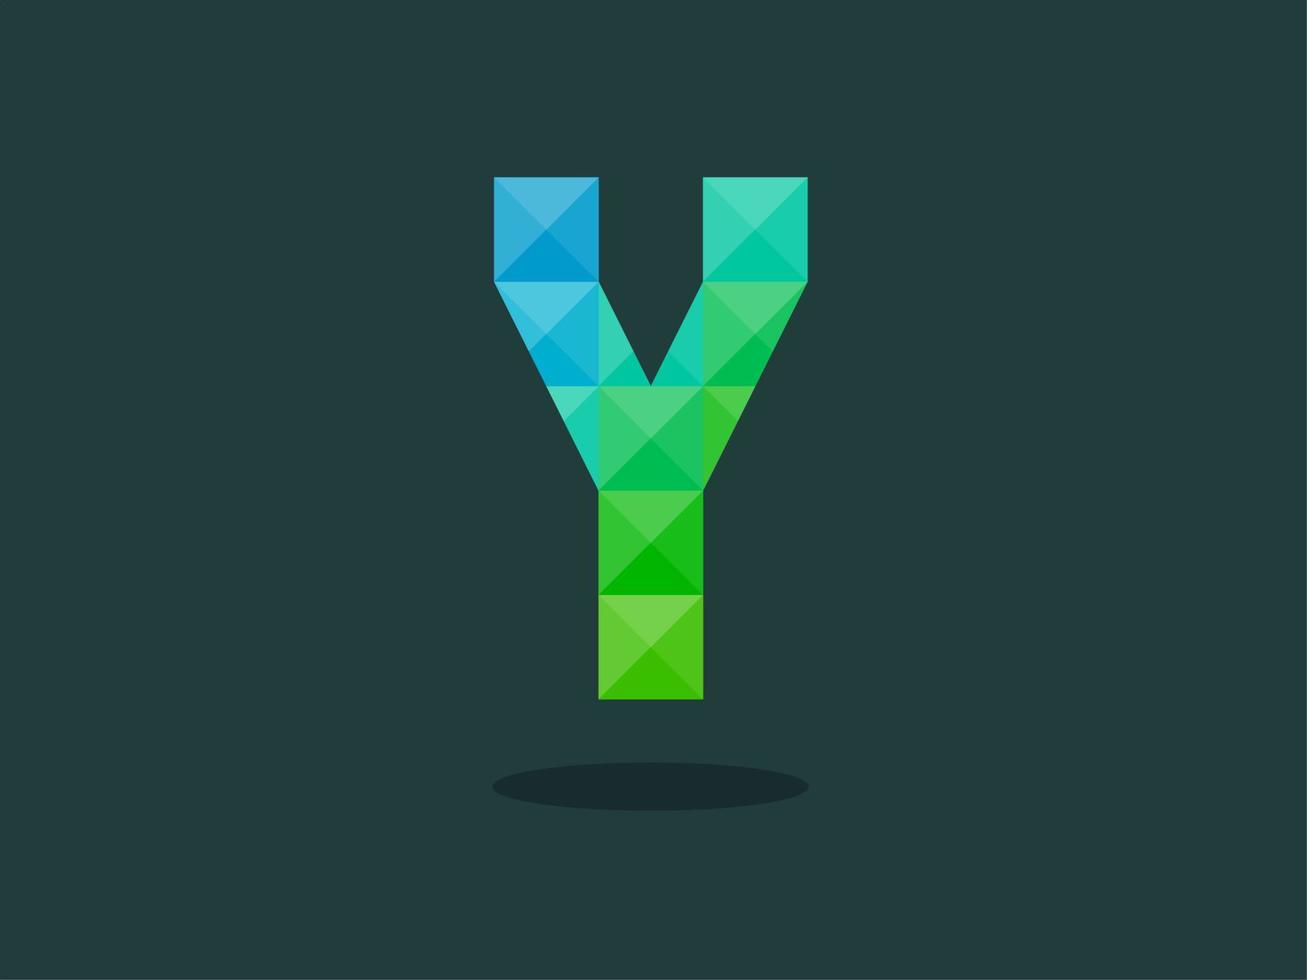 Alphabet letter Y with perfect combination of bright blue-green colors. Good for print, t-shirt design, logo, etc. Vector illustrations.